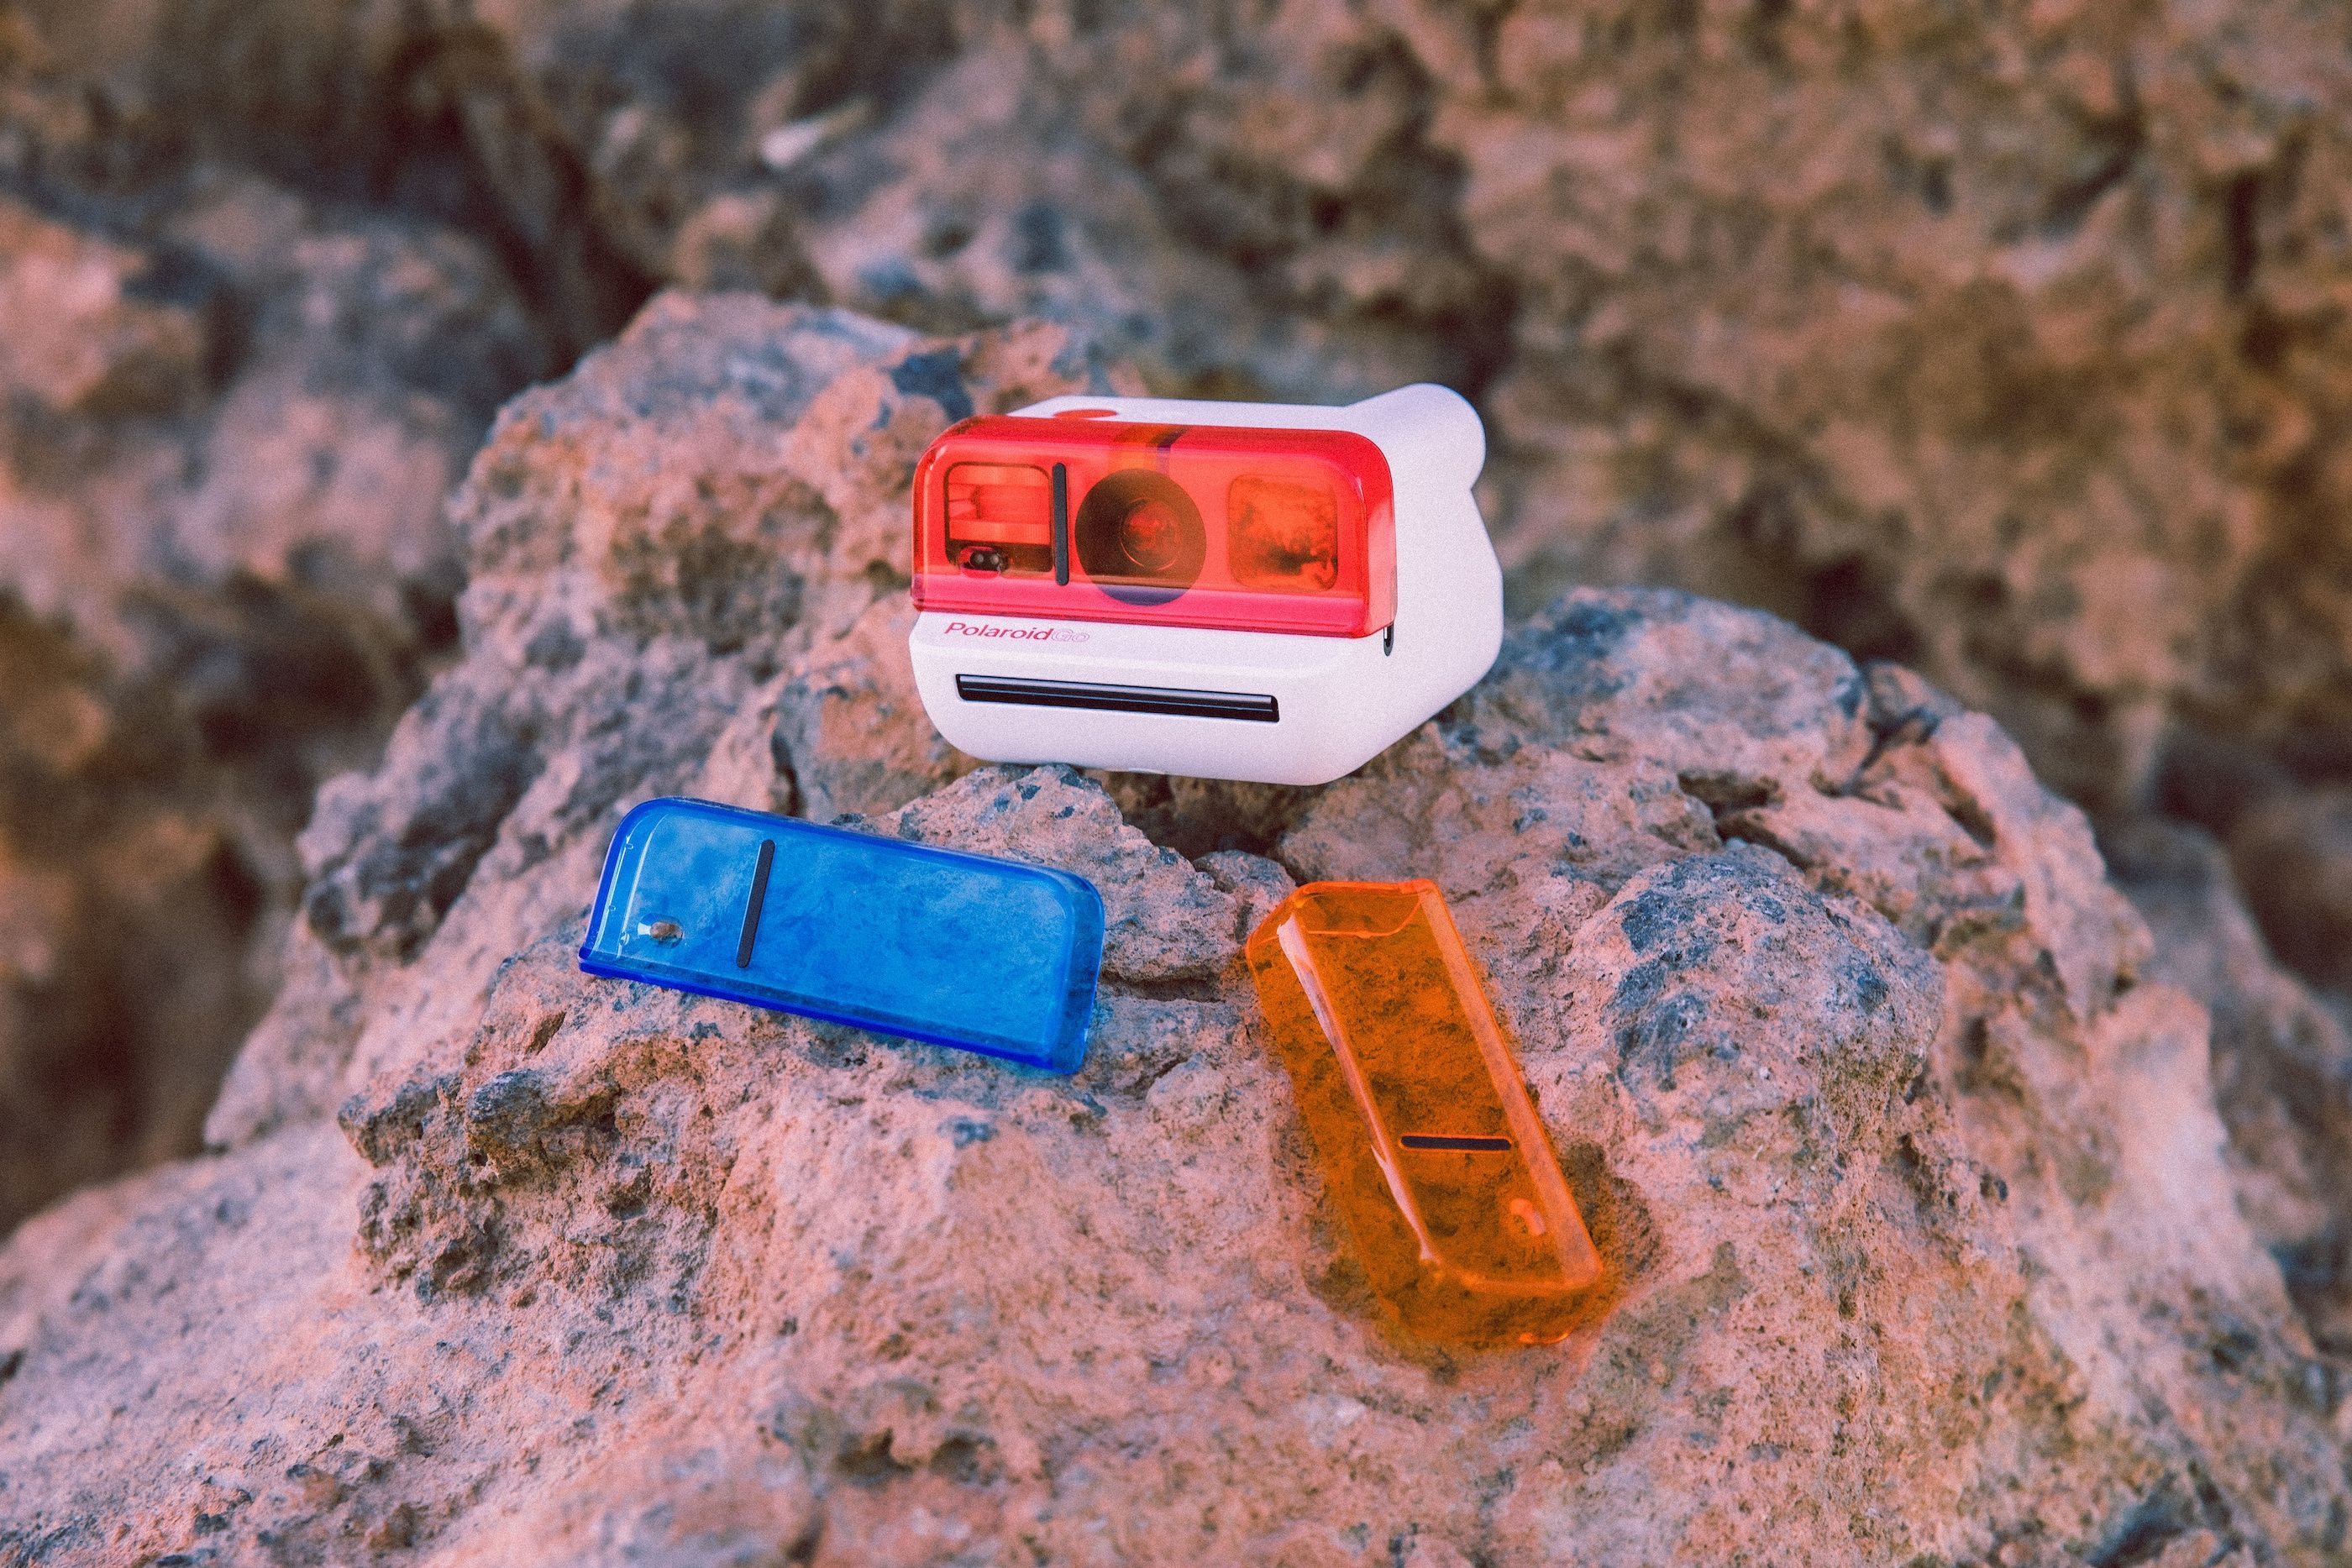 Polaroid Go now in two new colours and with amazing accessories